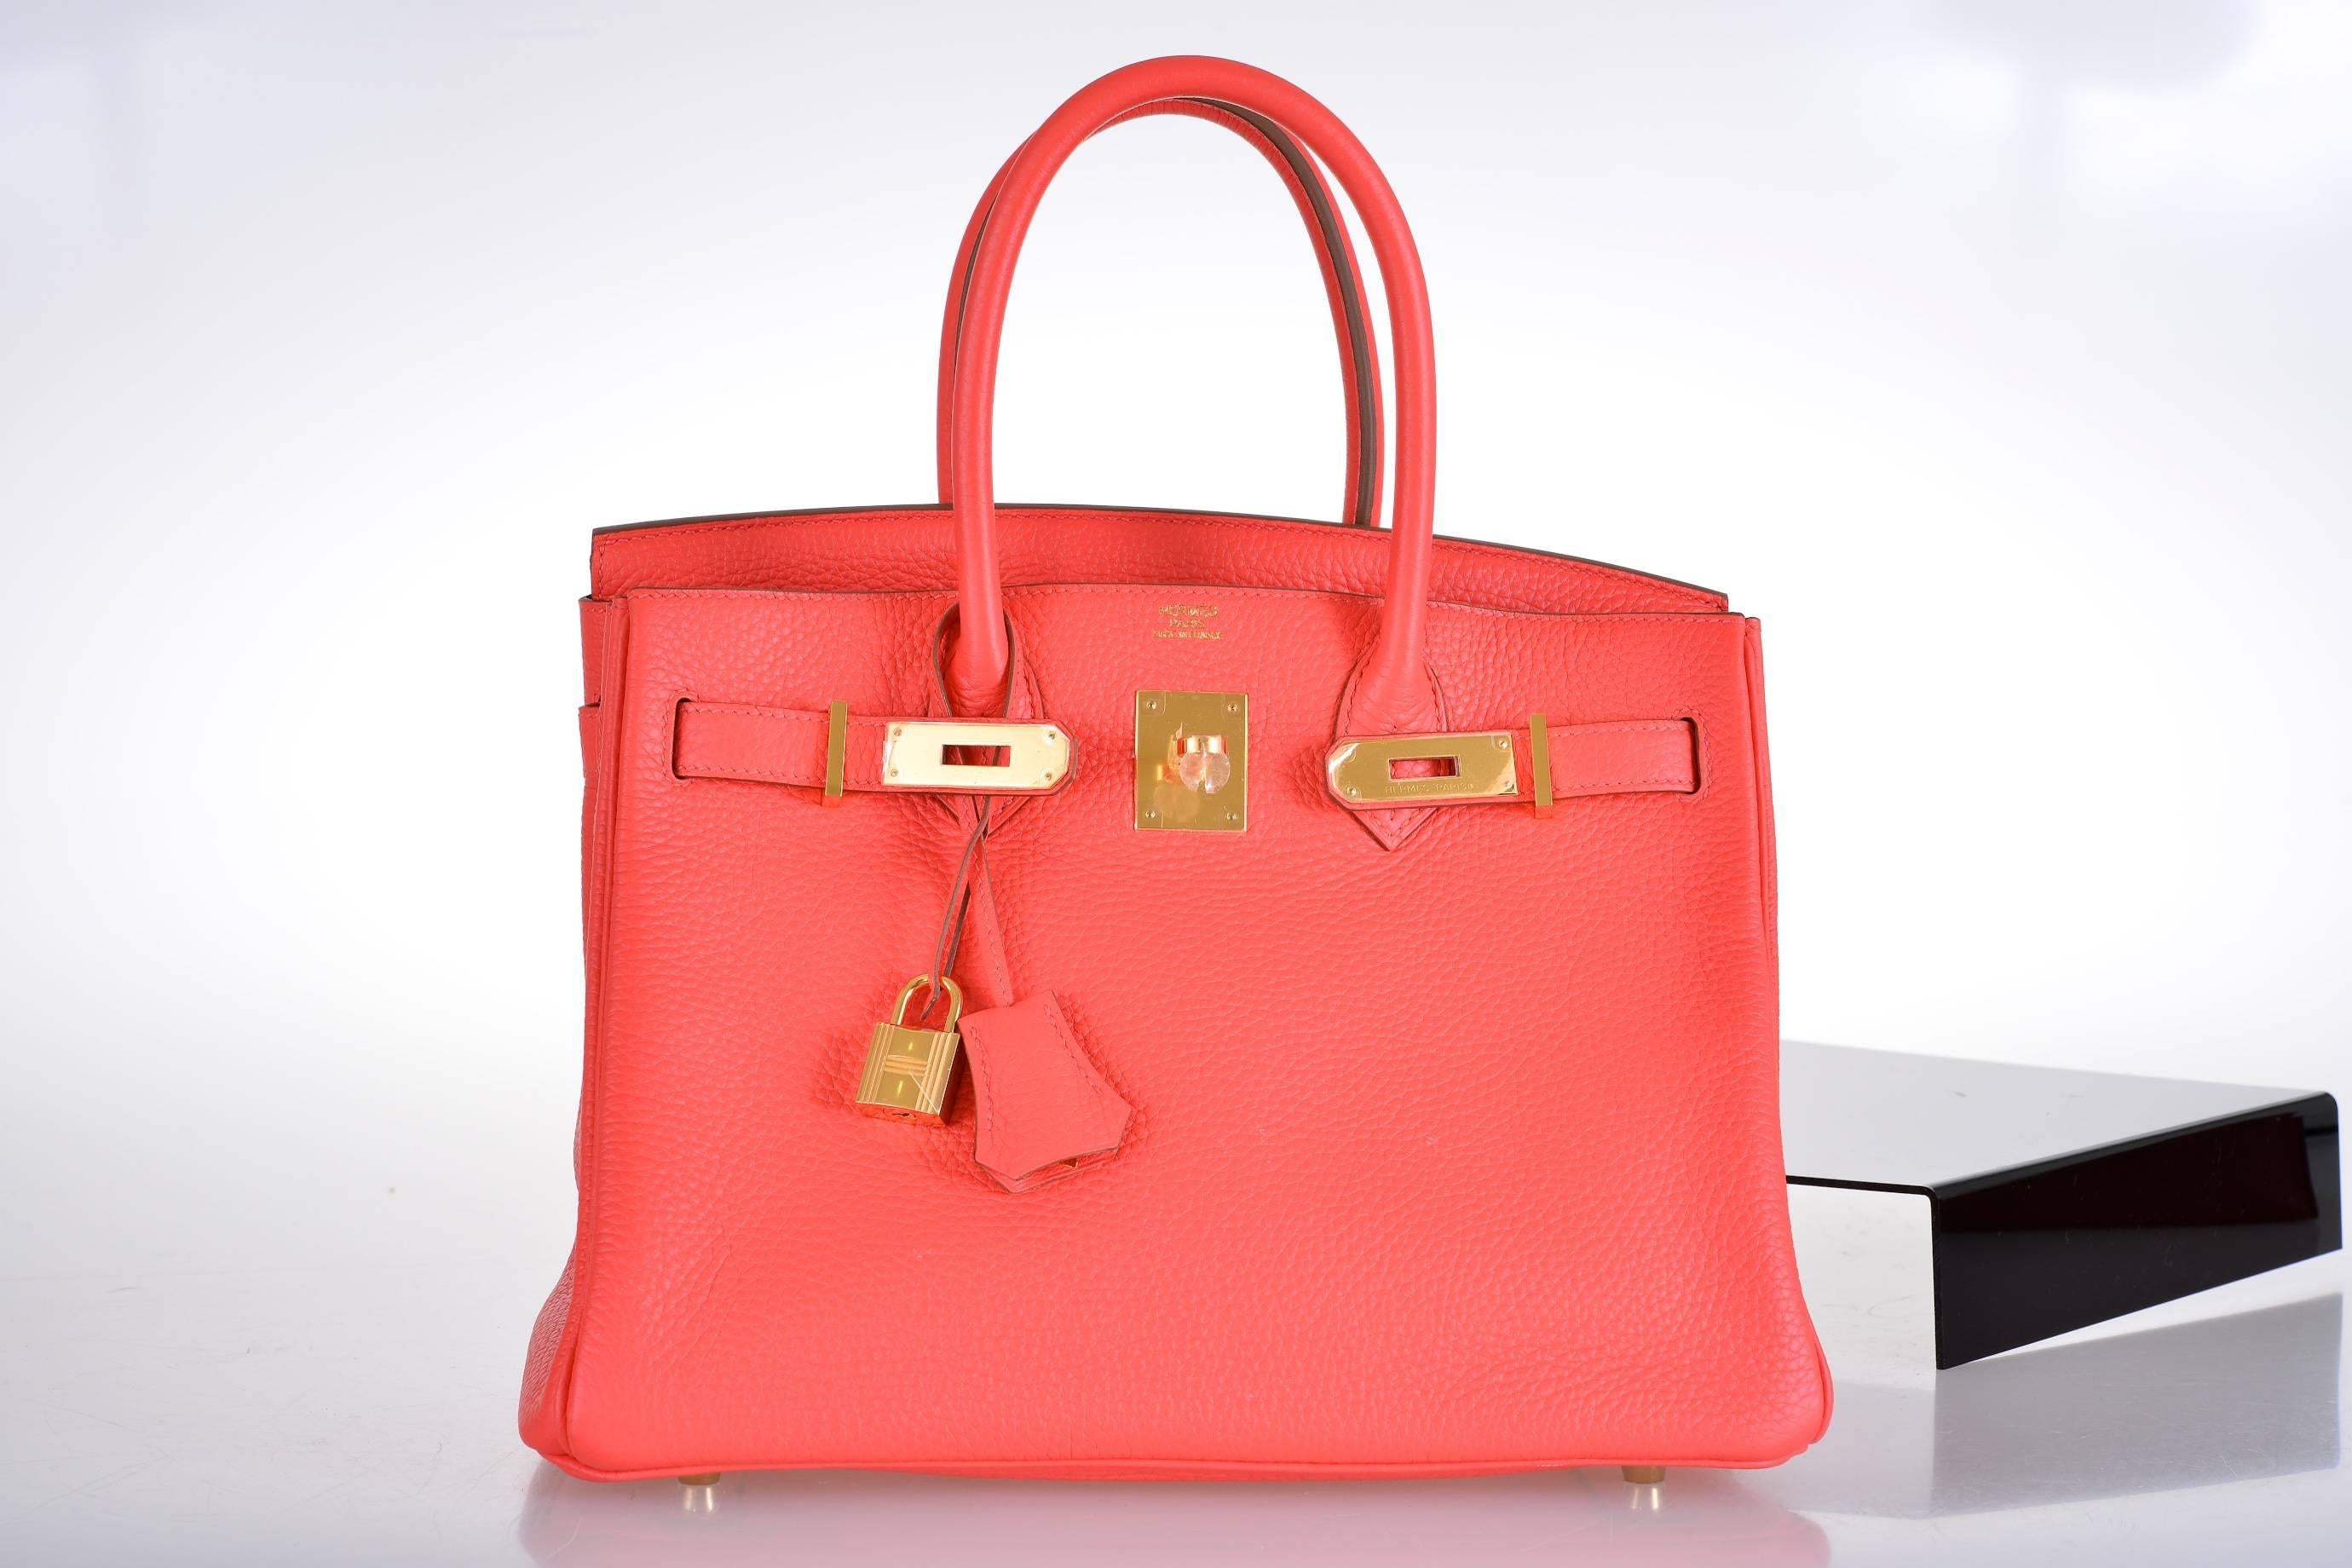 YOU MIGHT NEED YOUR SUNNIES FOR THIS ONE!

SUPER BRIGHT NEW RED! 
HERMES BIRKIN 35CM IN THE MOST BEAUTIFUL SPECIAL POROSUS MATTE RED GERANIUM. THE HARDWARE IS GOLD!

THIS BAG IS BRAND NEW. THE BRIGHTEST OF REDS HERMES HAS EVER MADE!

THE